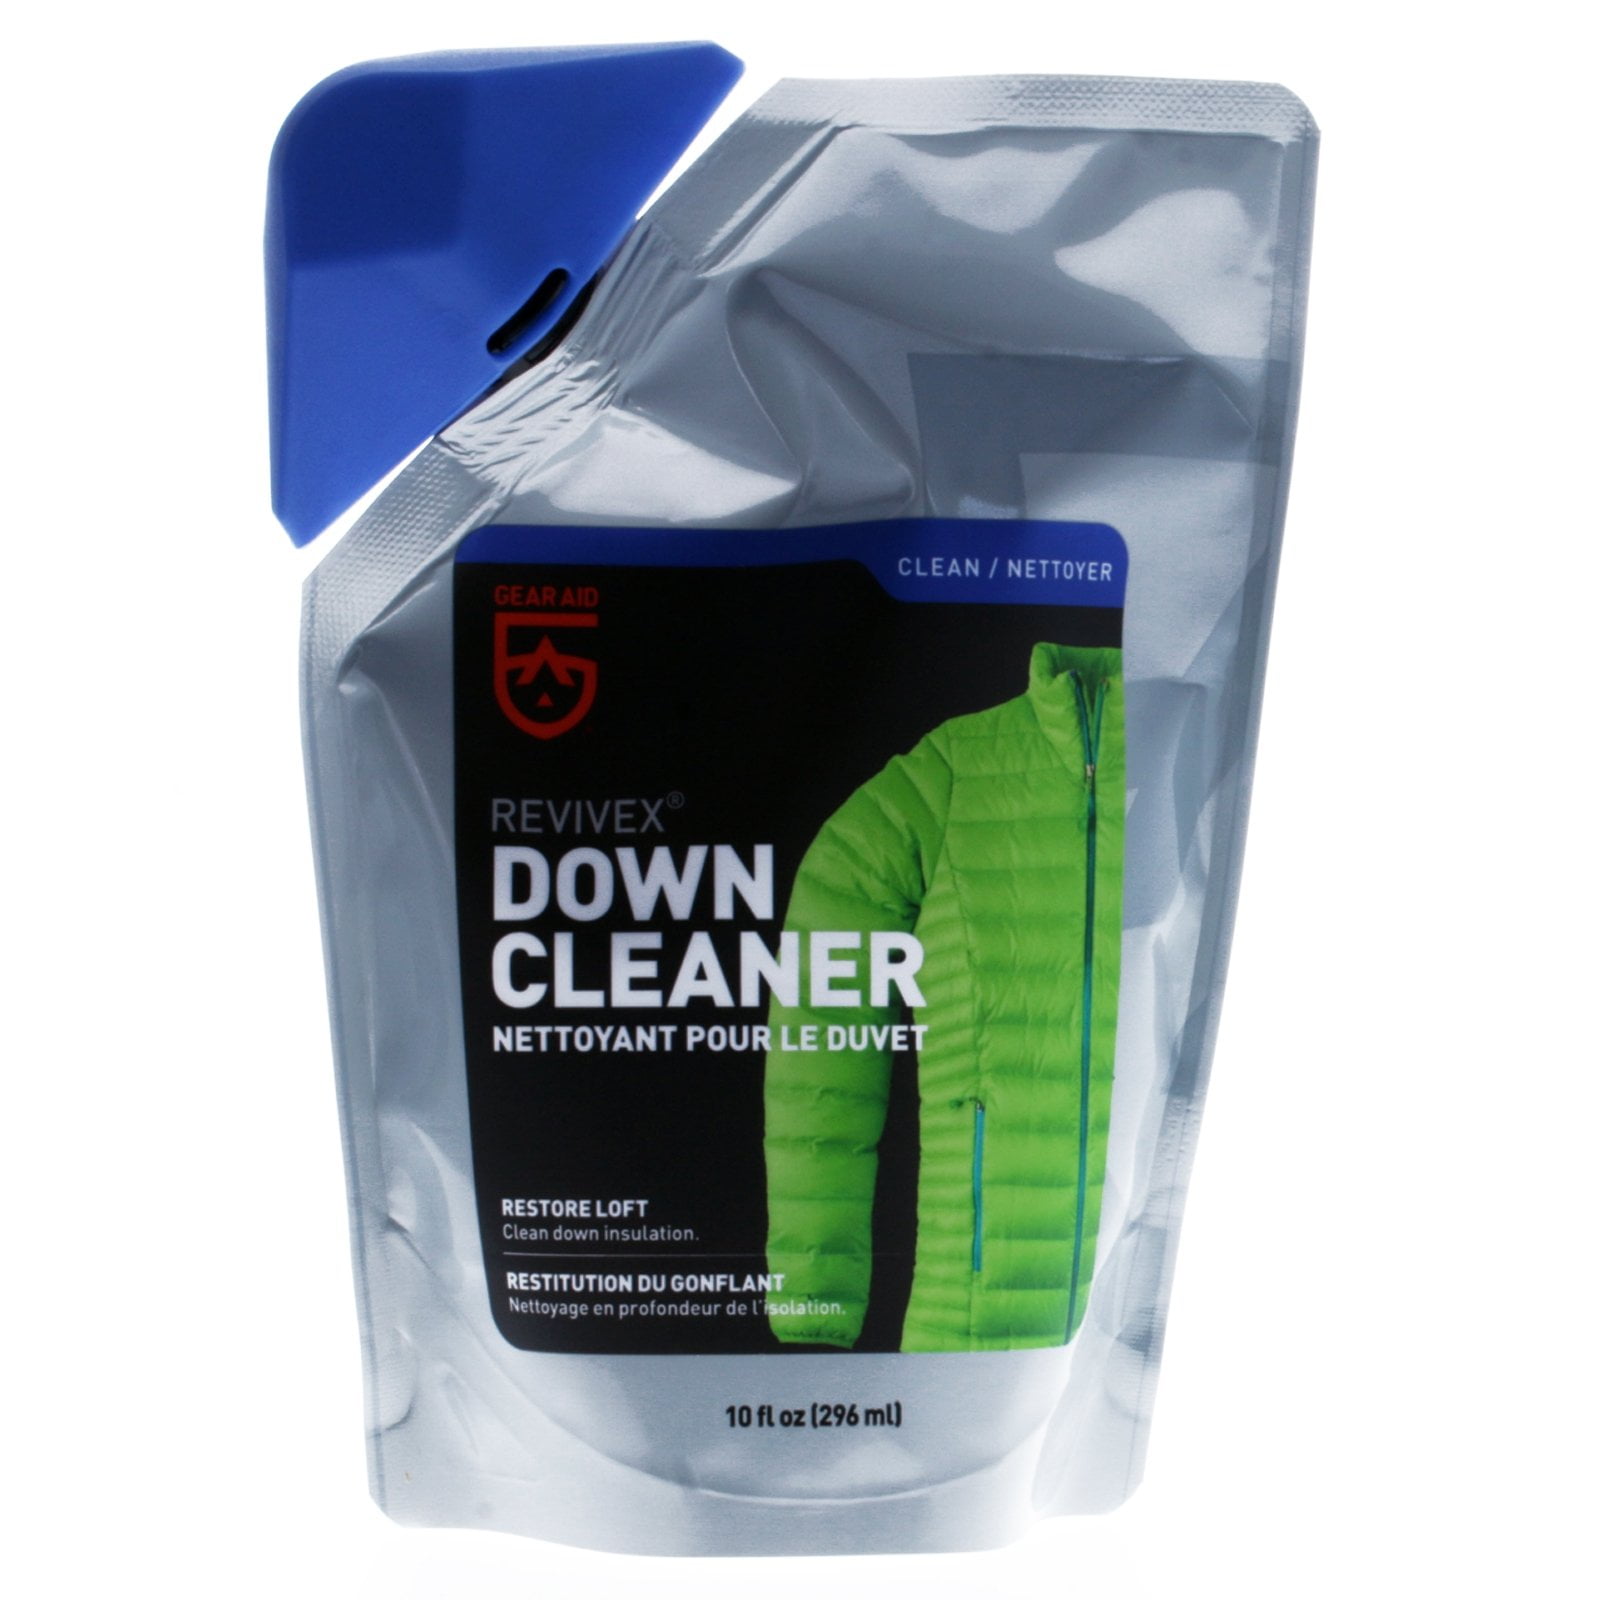 GEAR AID Revivex Down Cleaner Wash and Care Kits for Down Puffer Jackets  and Sleeping Bags, Restores Loft, Repairs Holes with Tenacious Tape